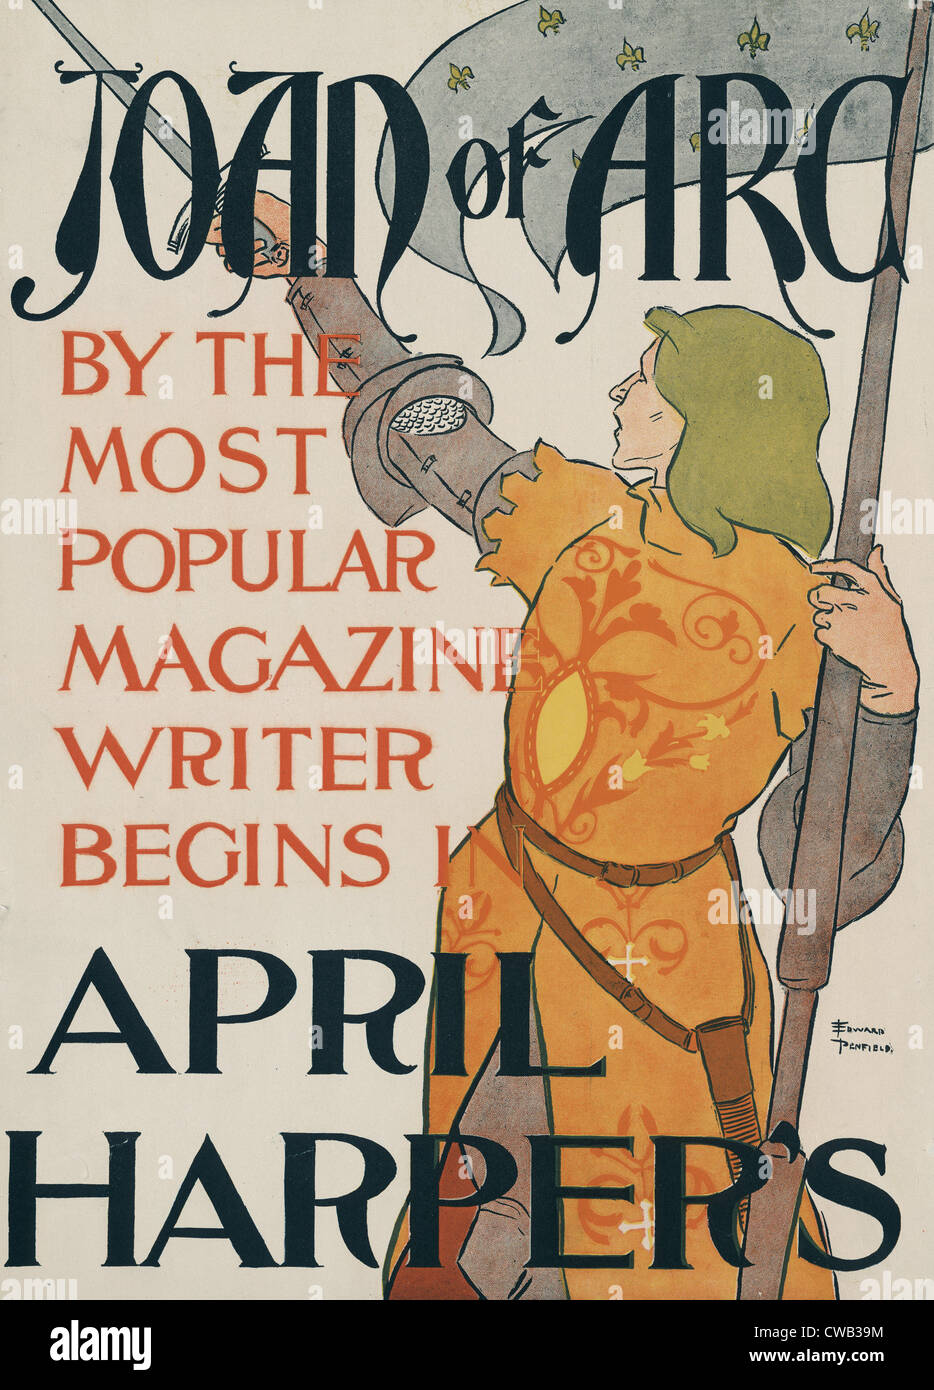 Poster for Harper's magazine showing Joan of Arc holding a flag in one hand and pointing her sword with the other, caption Stock Photo